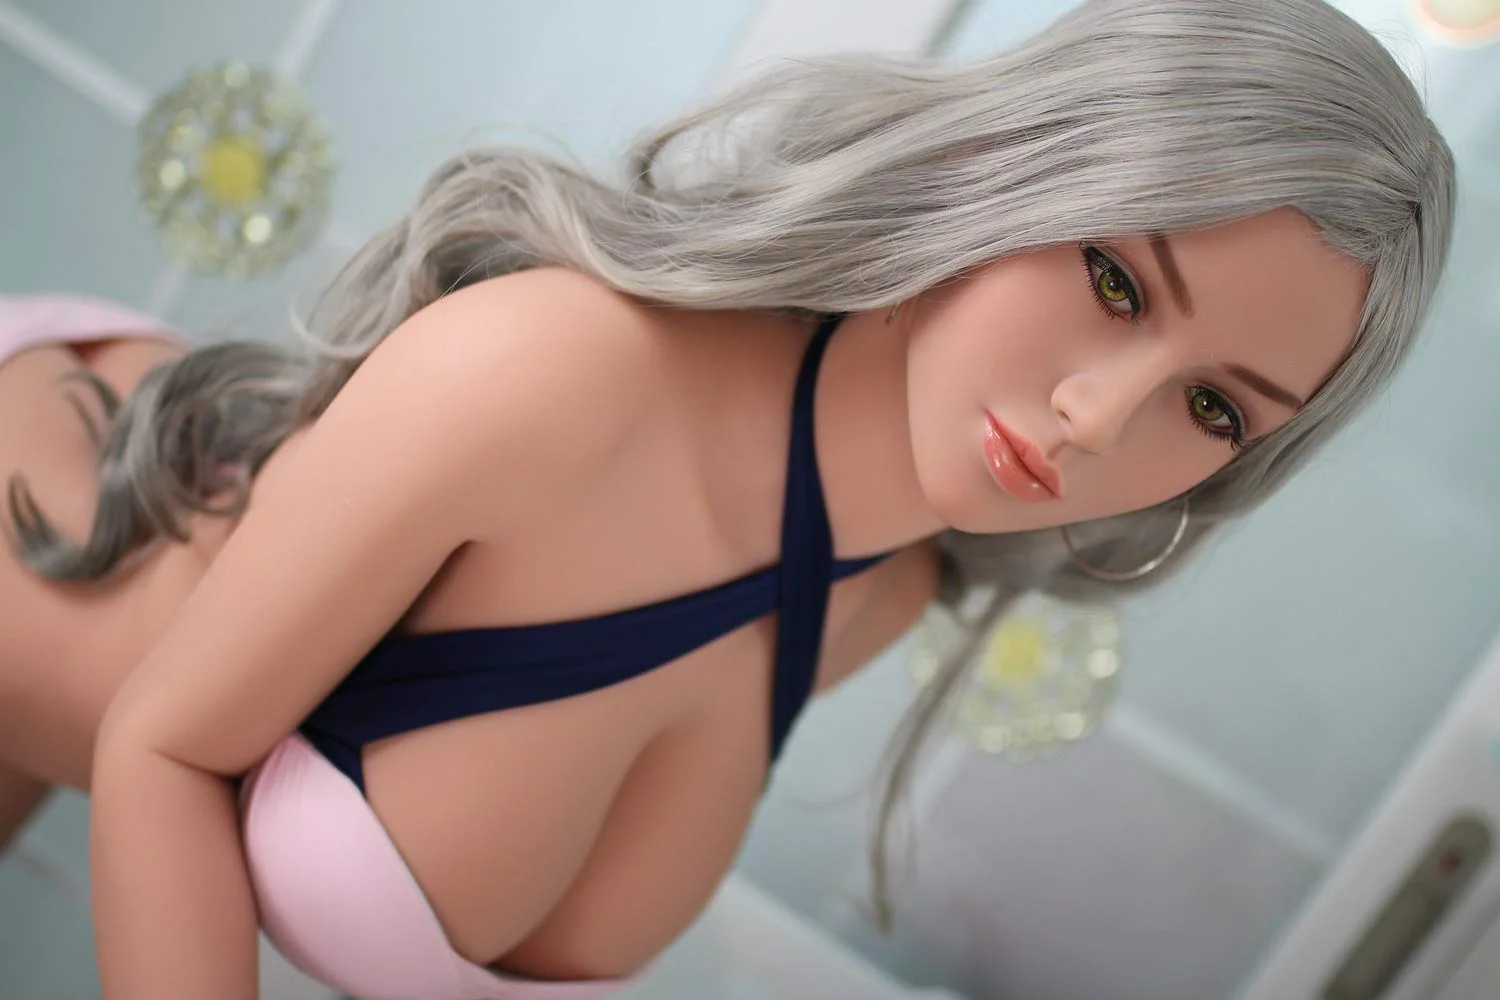 Gray long-haired sex doll